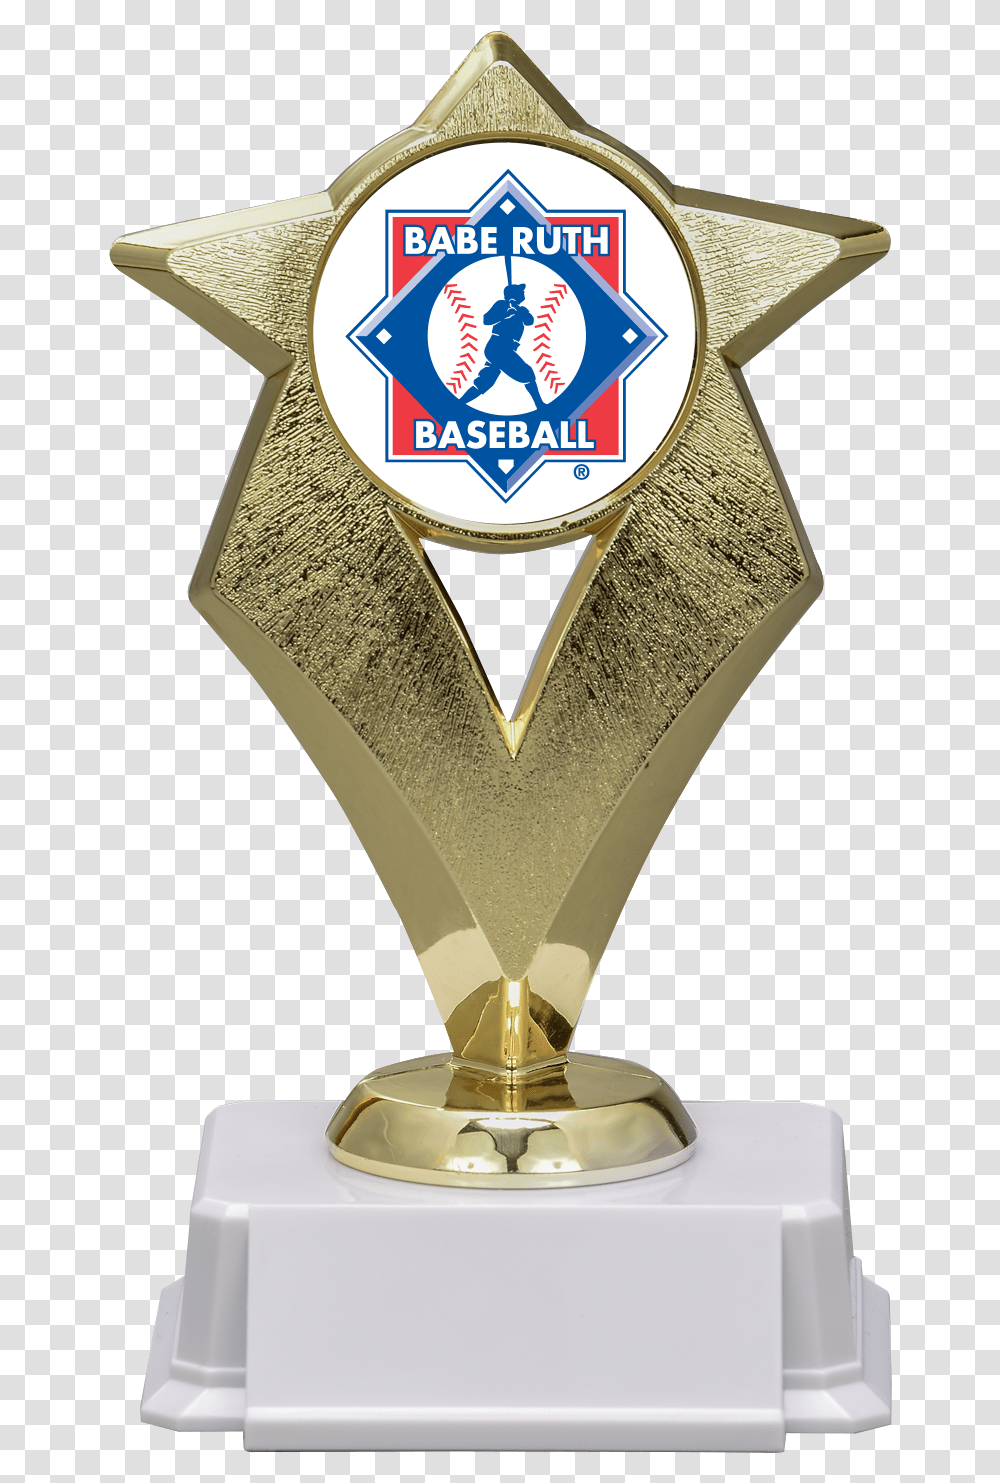 Gold Star Trophy Babe Ruth Baseball, Lamp Transparent Png